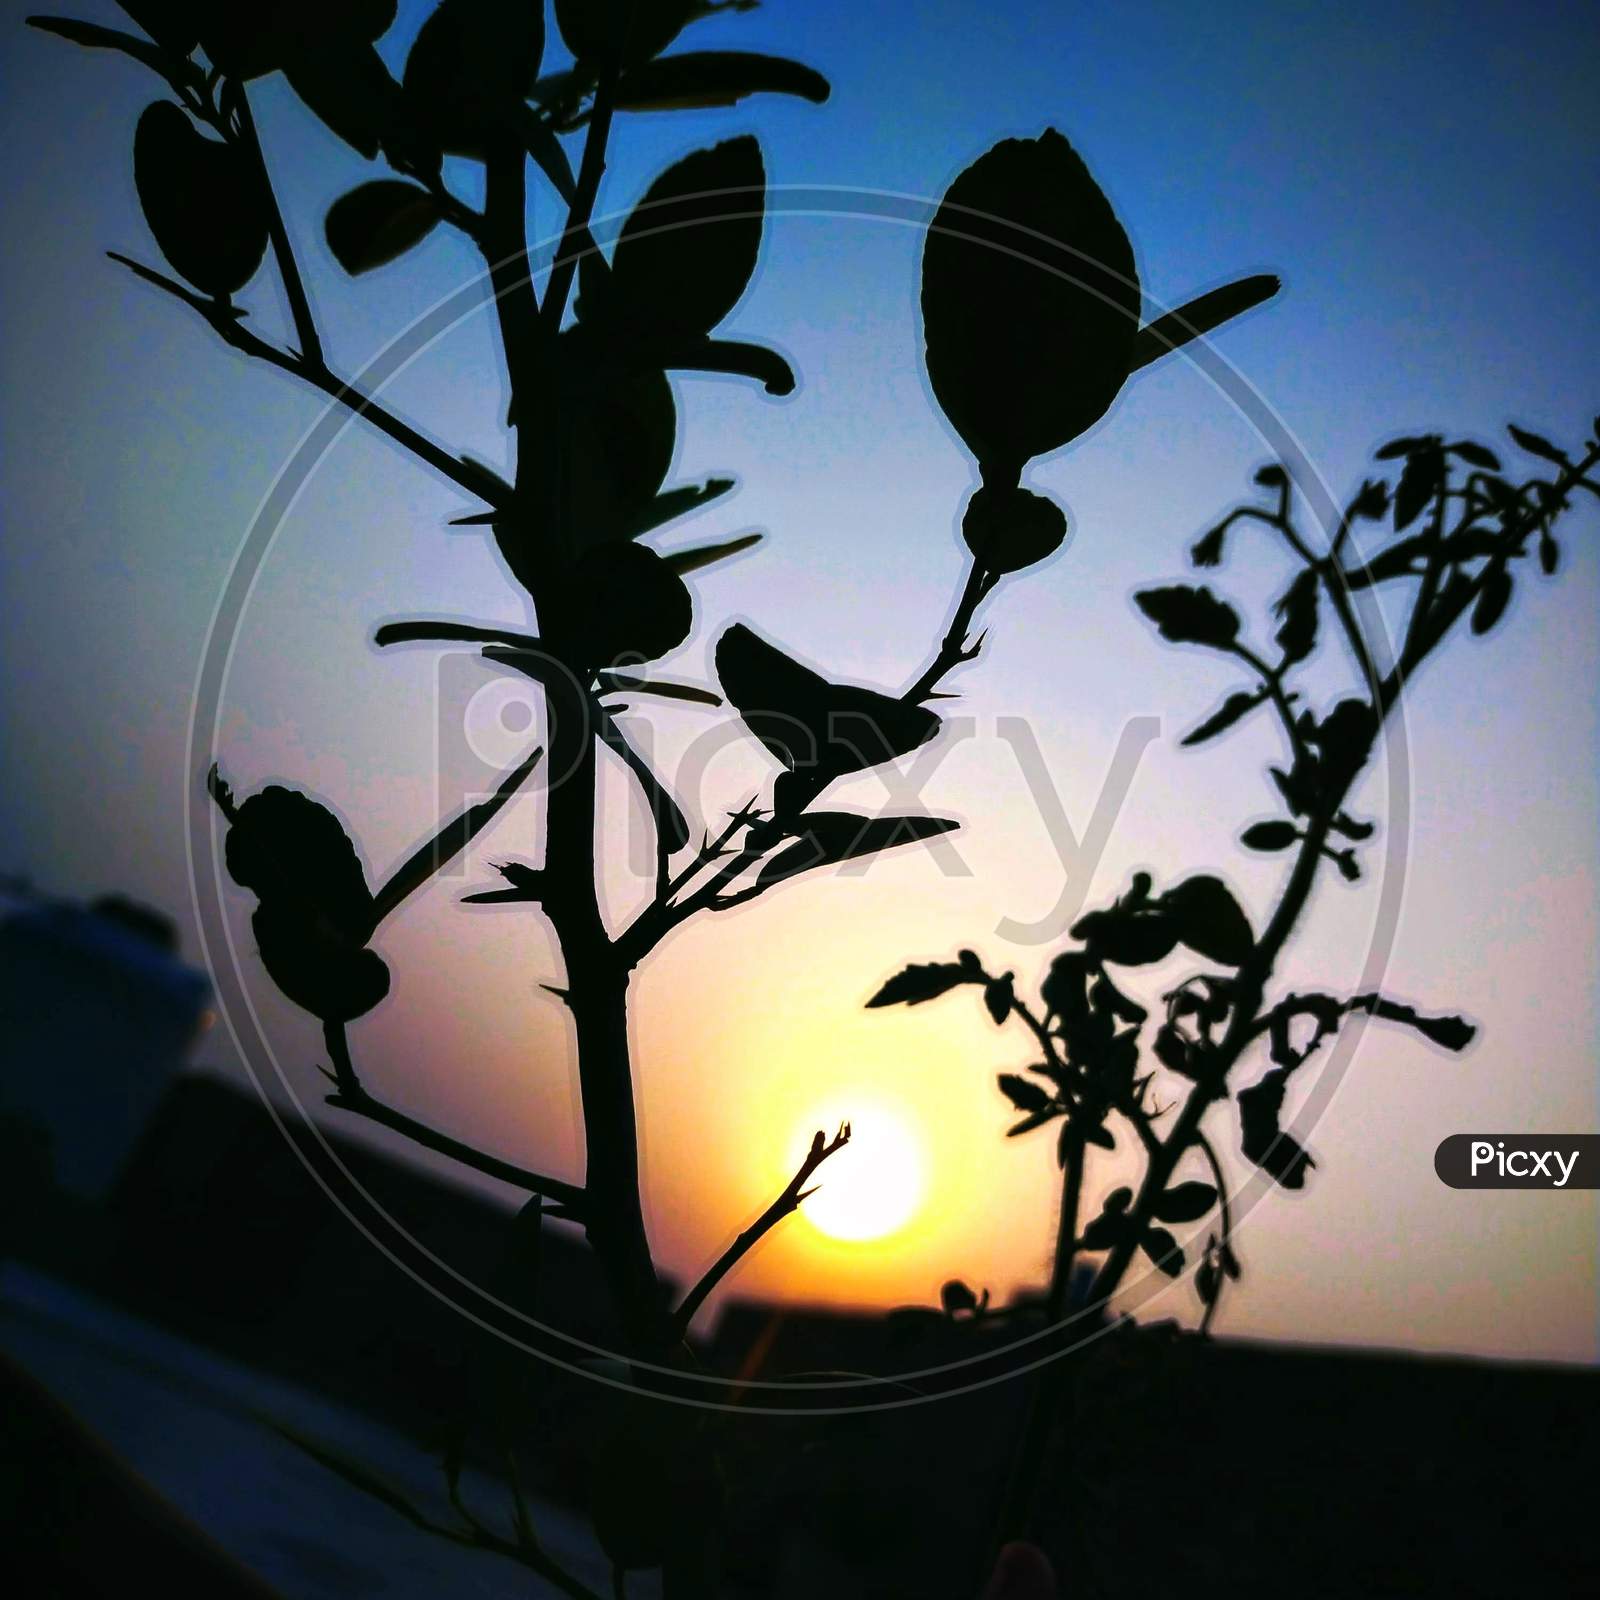 Evening sunset and a nice silhouette of plants and human beings. An amazing sunset photography